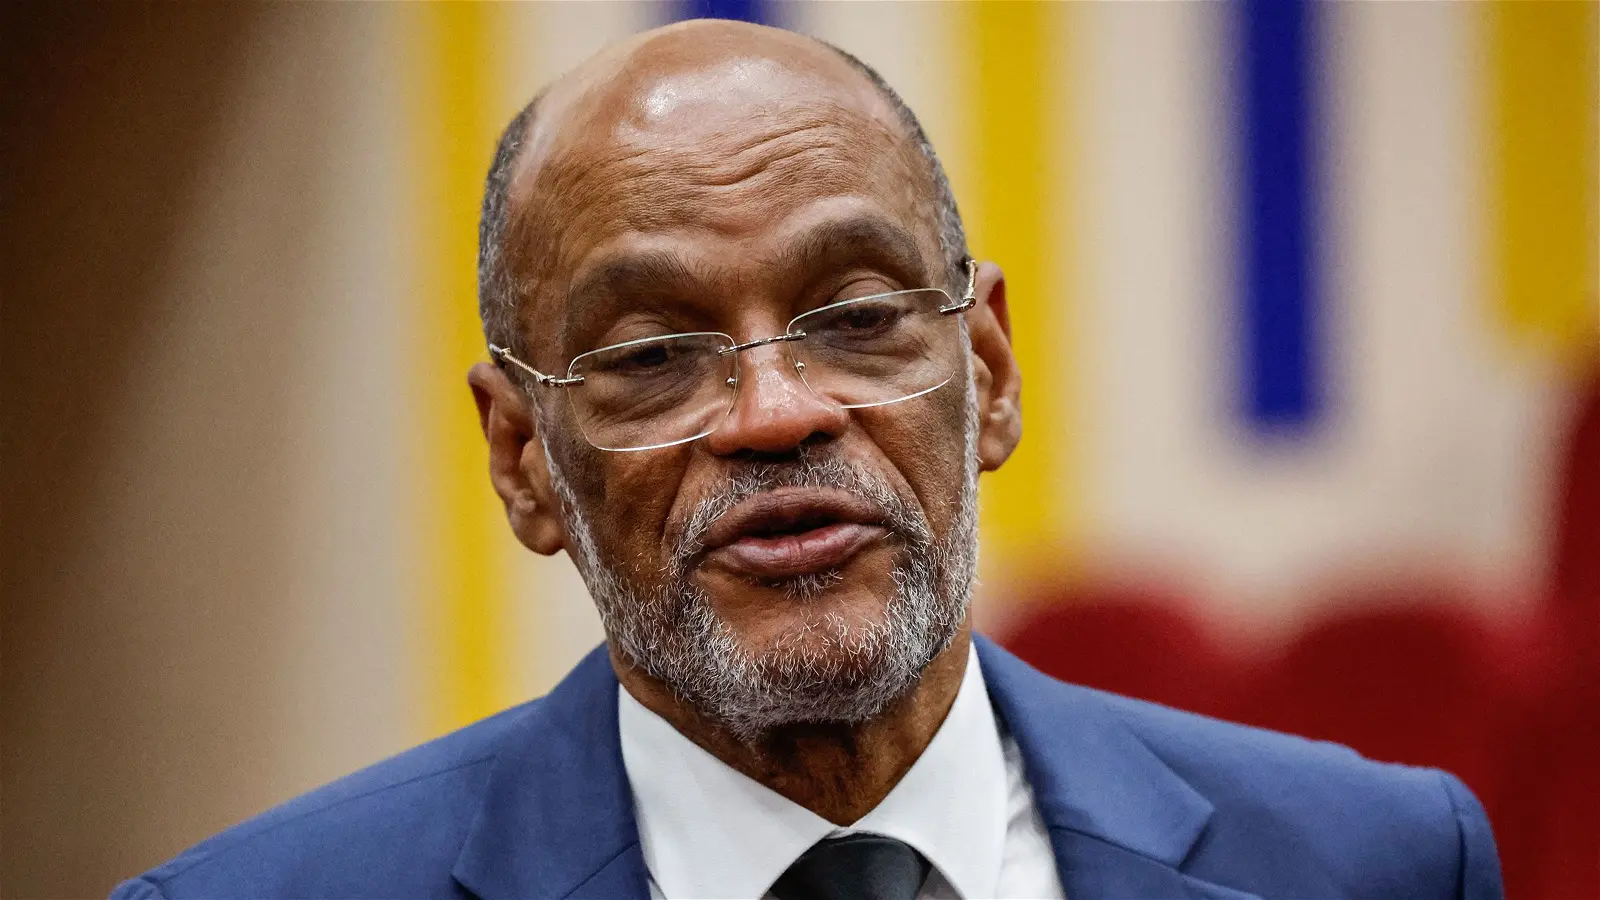 Haiti’s prime minister Ariel Henry resigns as law and order collapses